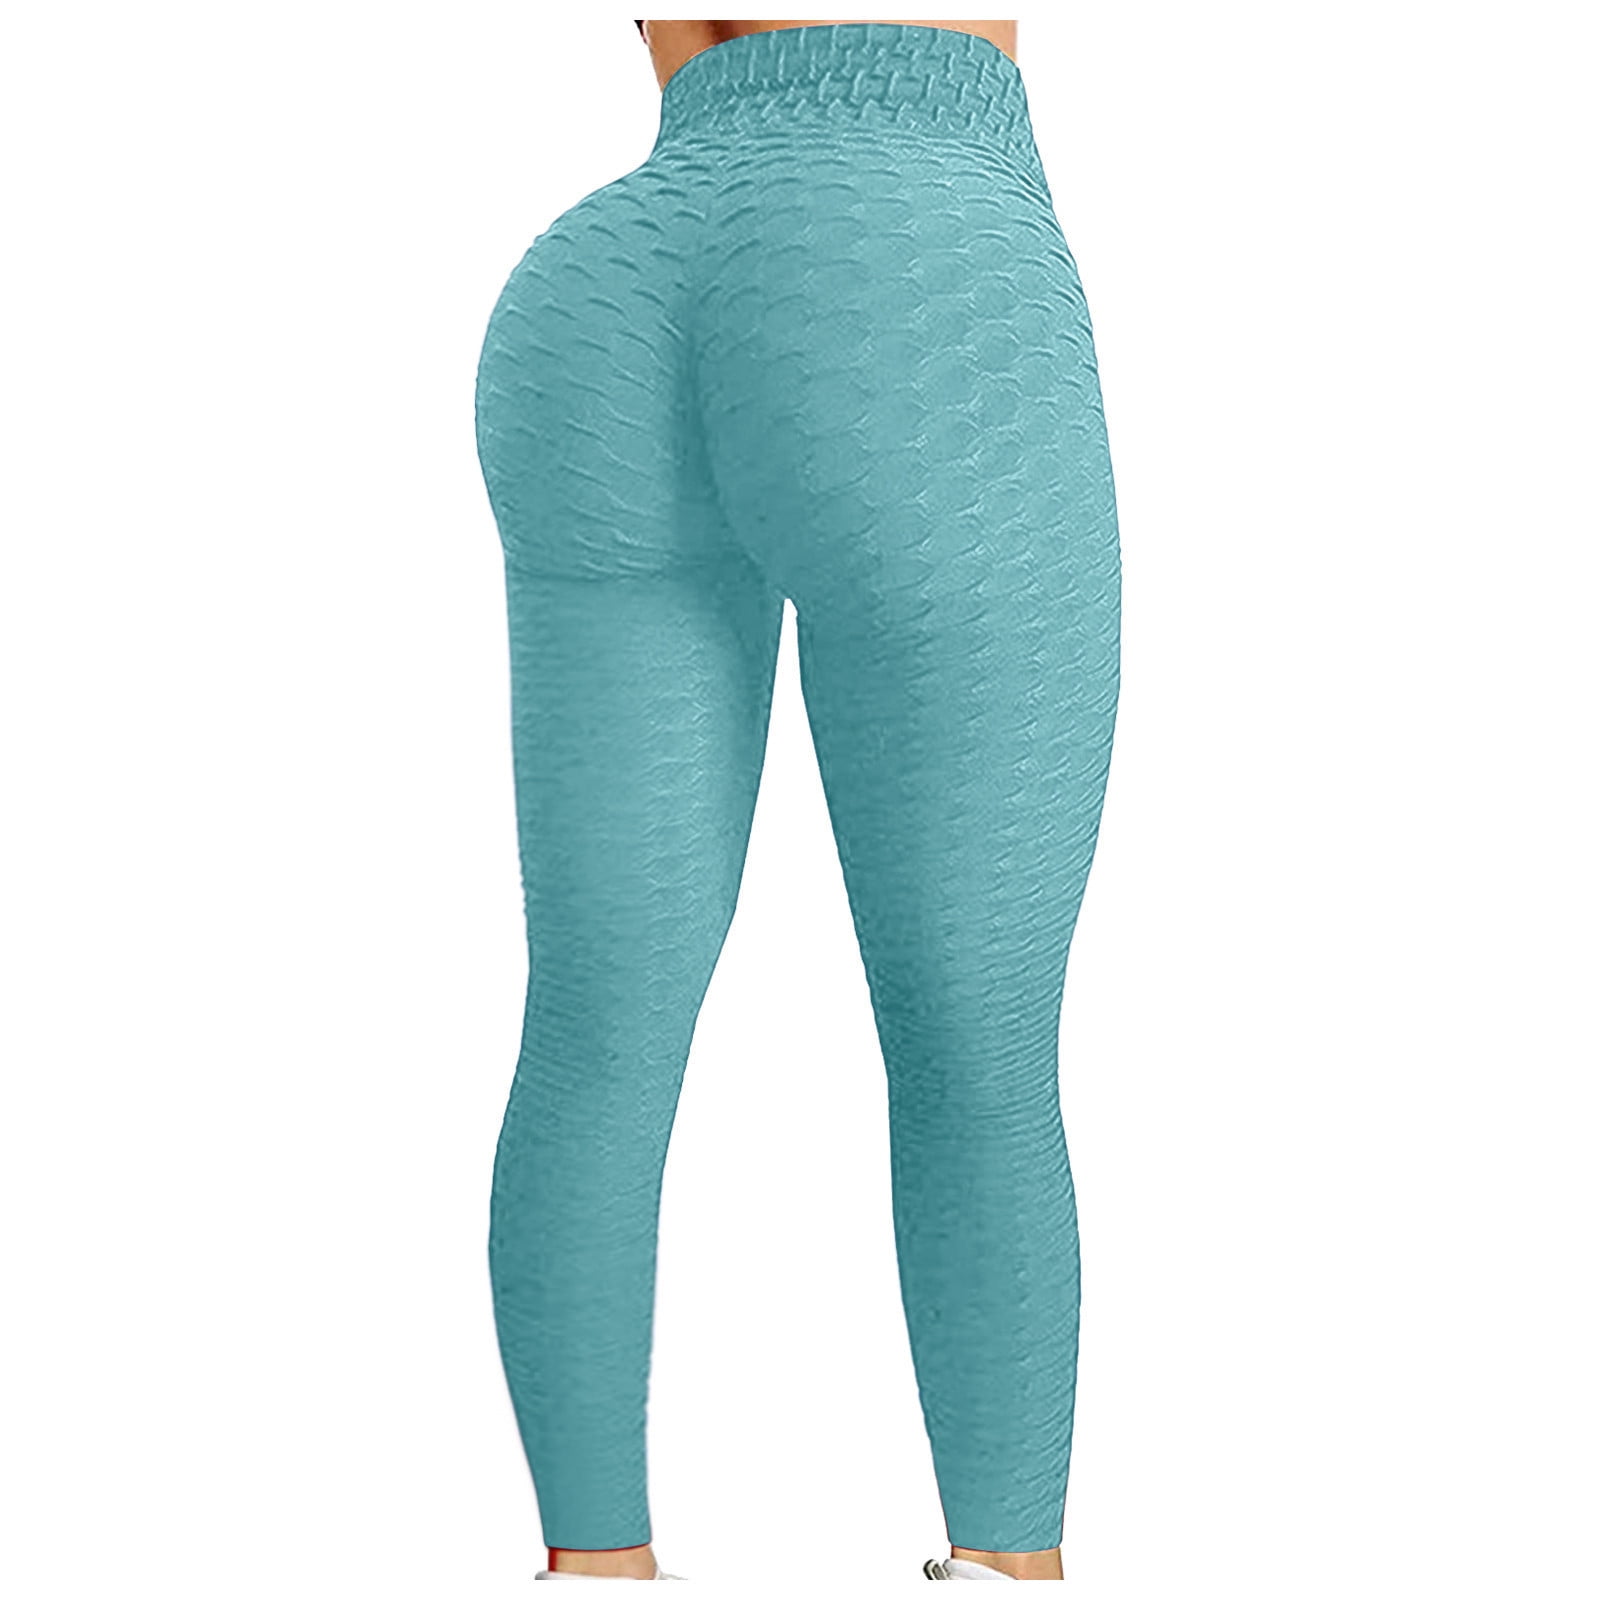 YYDGH Booty Leggings for Women Textured Scrunch Butt Lift Yoga Pants  Slimming Workout High Waisted Anti Cellulite Tights Sky Blue S 